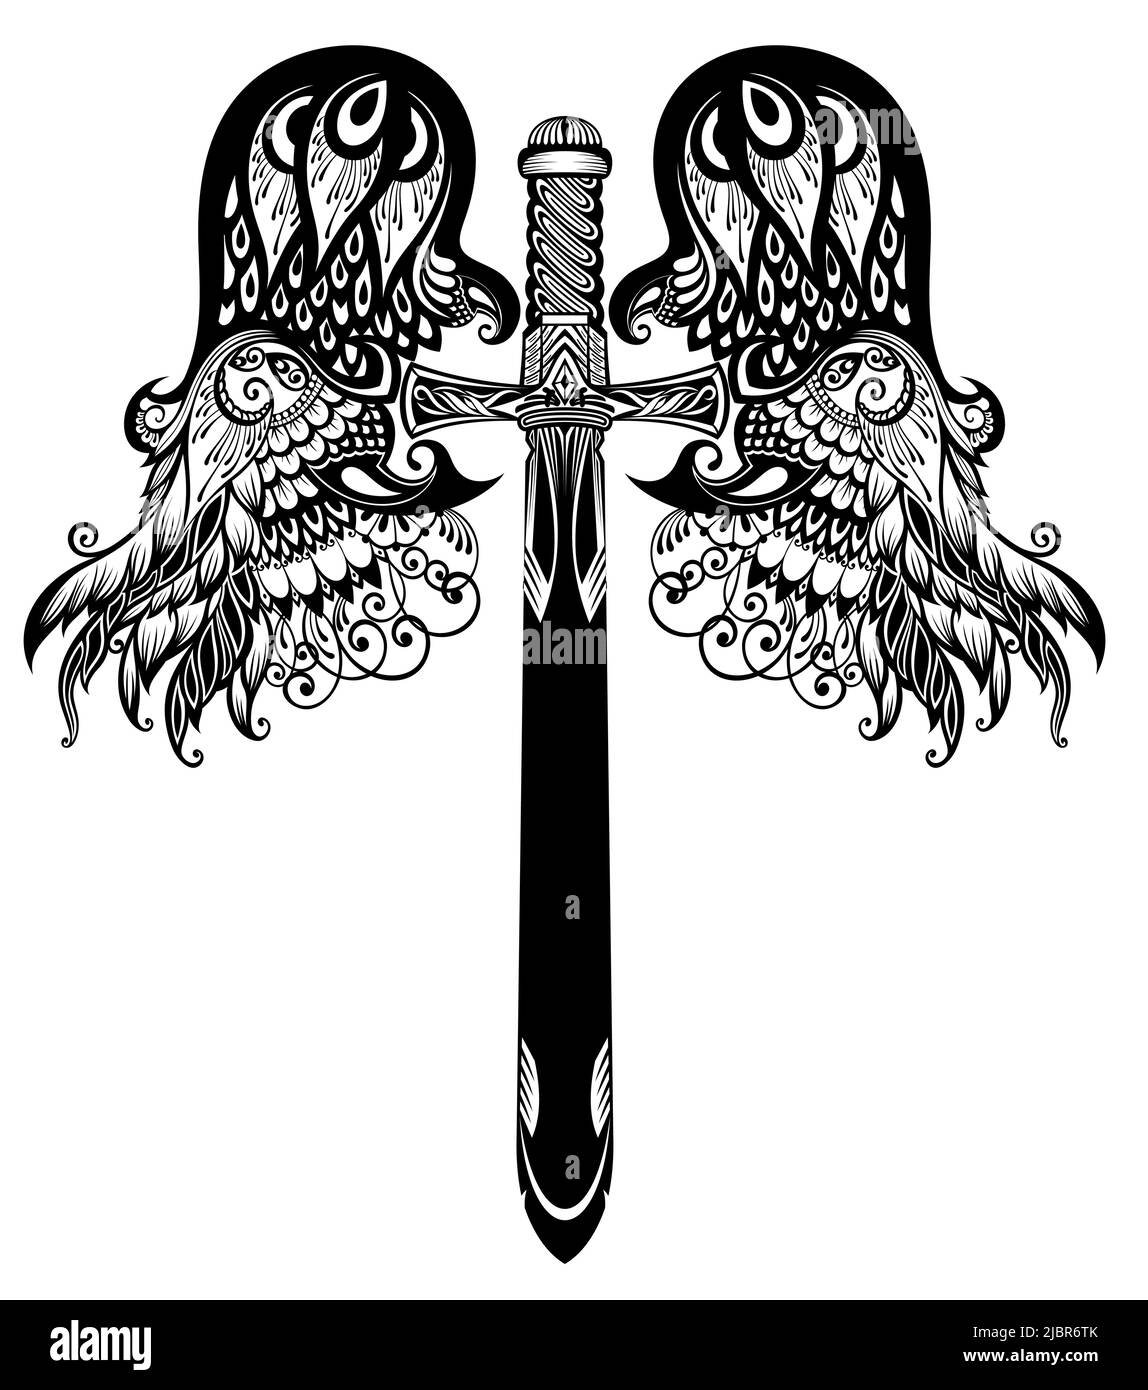 Sword with wings for your design Stock Vector